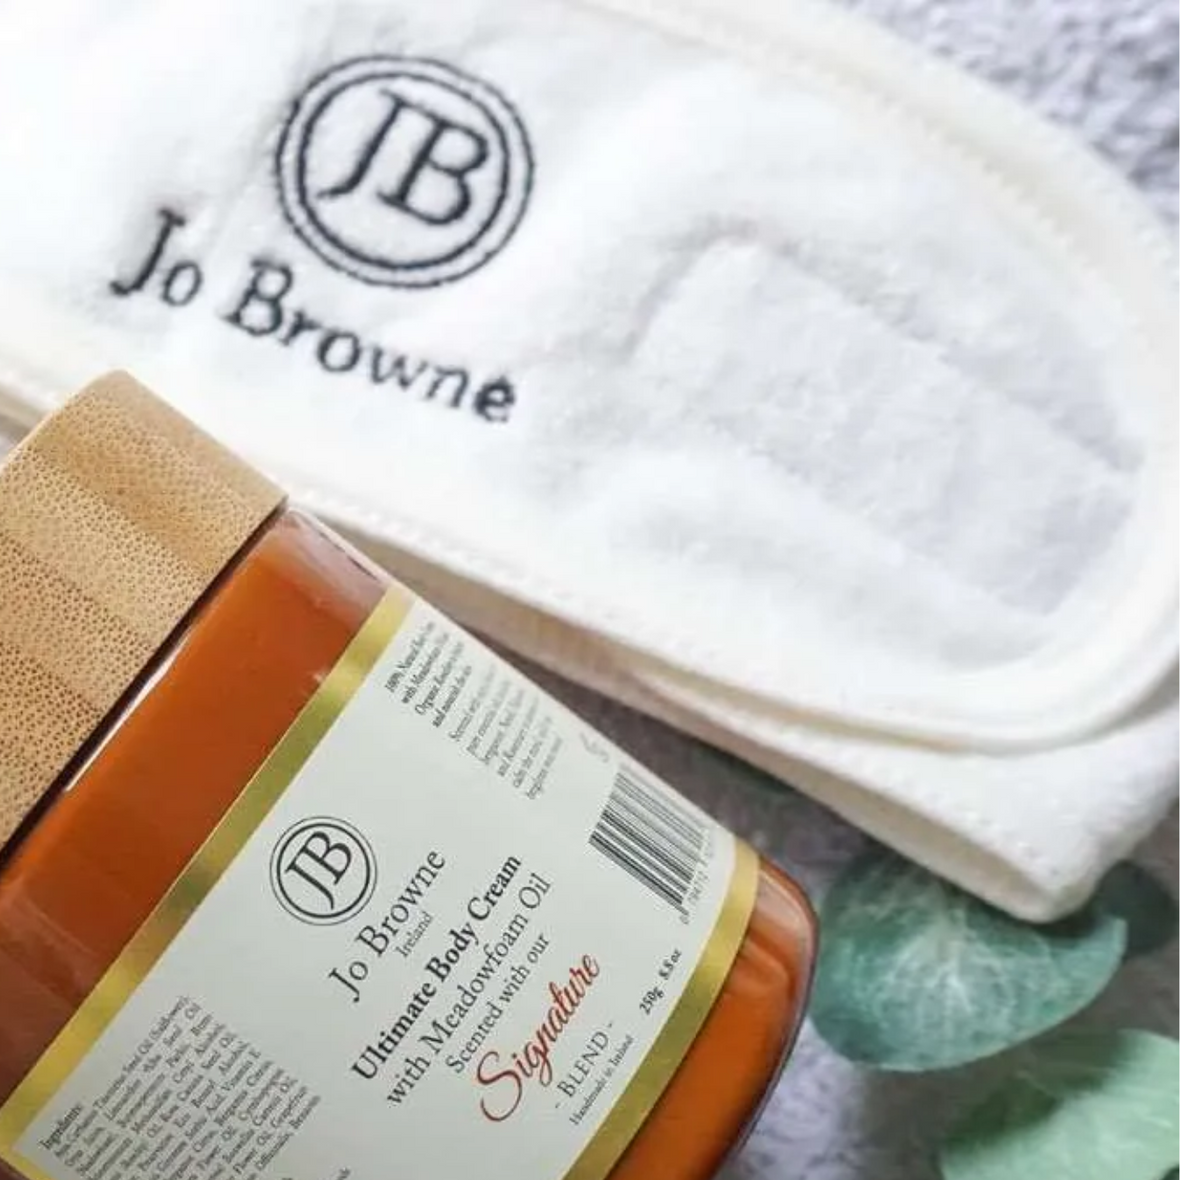 A product shot of the Jo Browne Luxury Headband. 